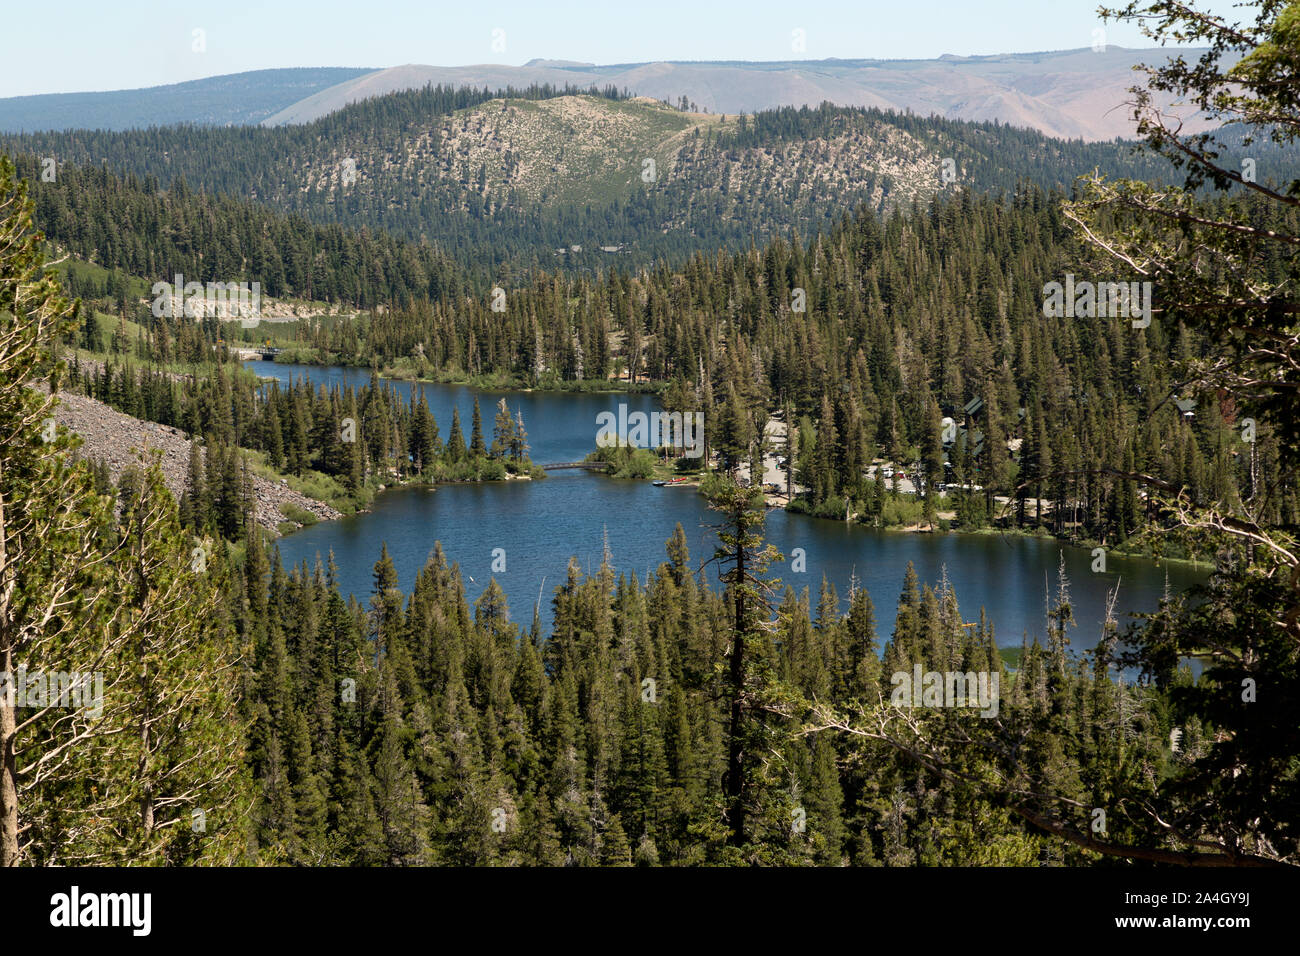 Twin Lakes is located in the eastern Sierra Nevada Mountains near the town of Mammoth Lakes, California Stock Photo